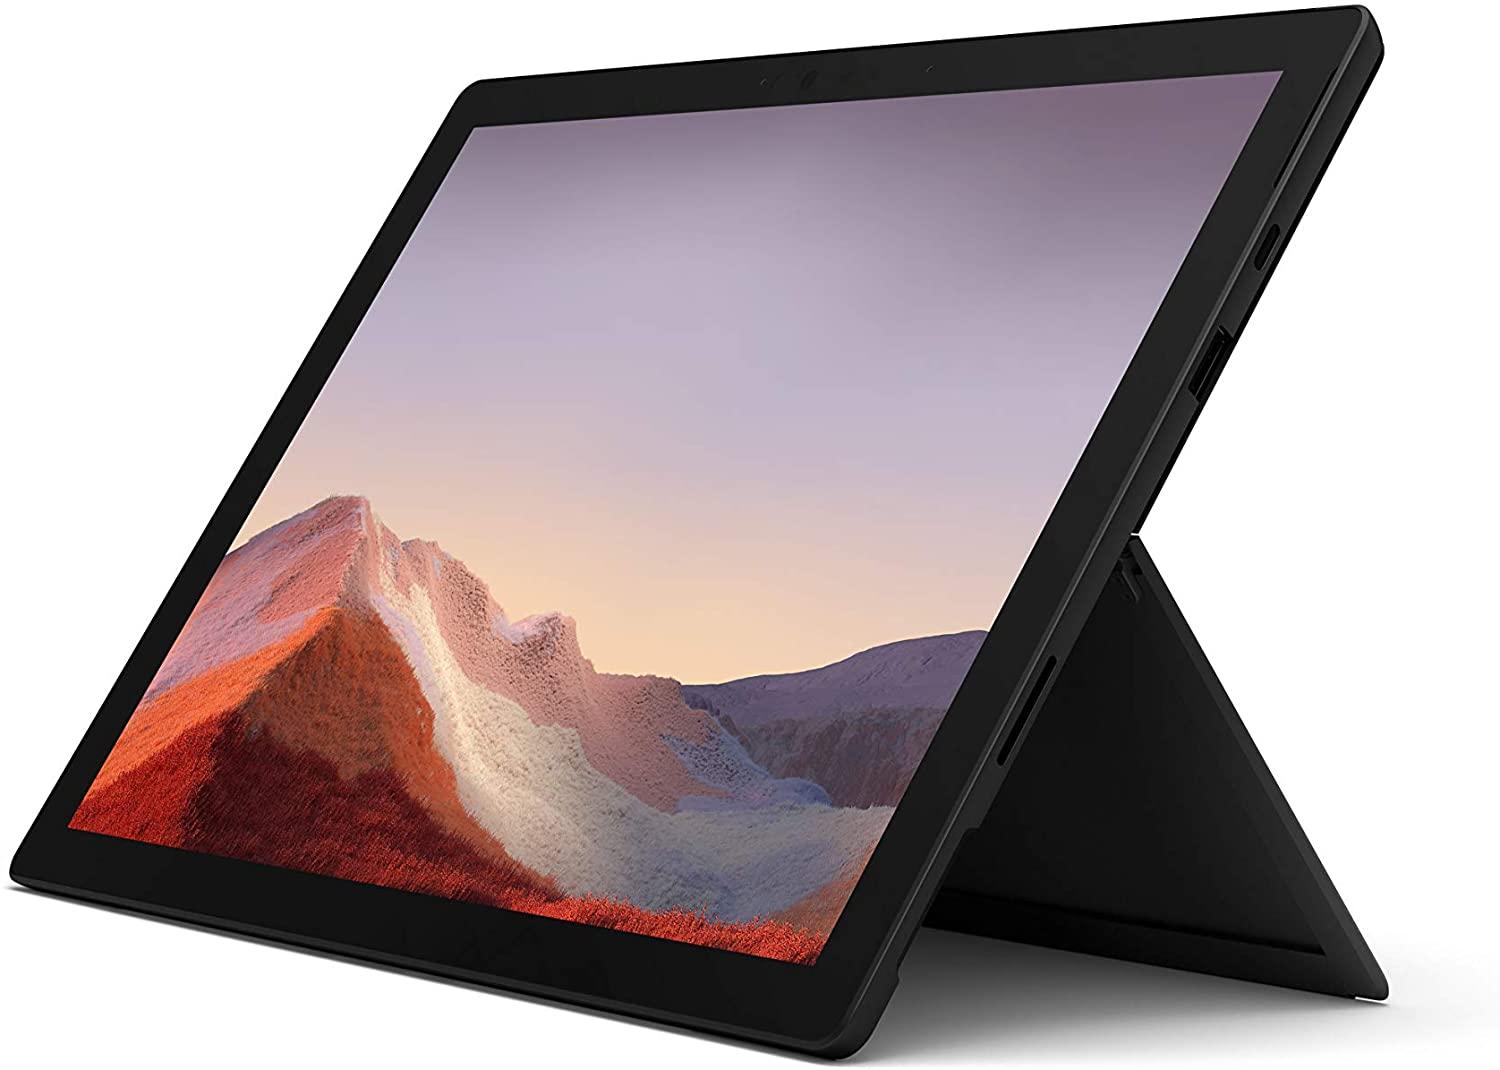 Microsoft Surface Pro 7+ i5 8GB 256GB Tablet for $645.98 Shipped